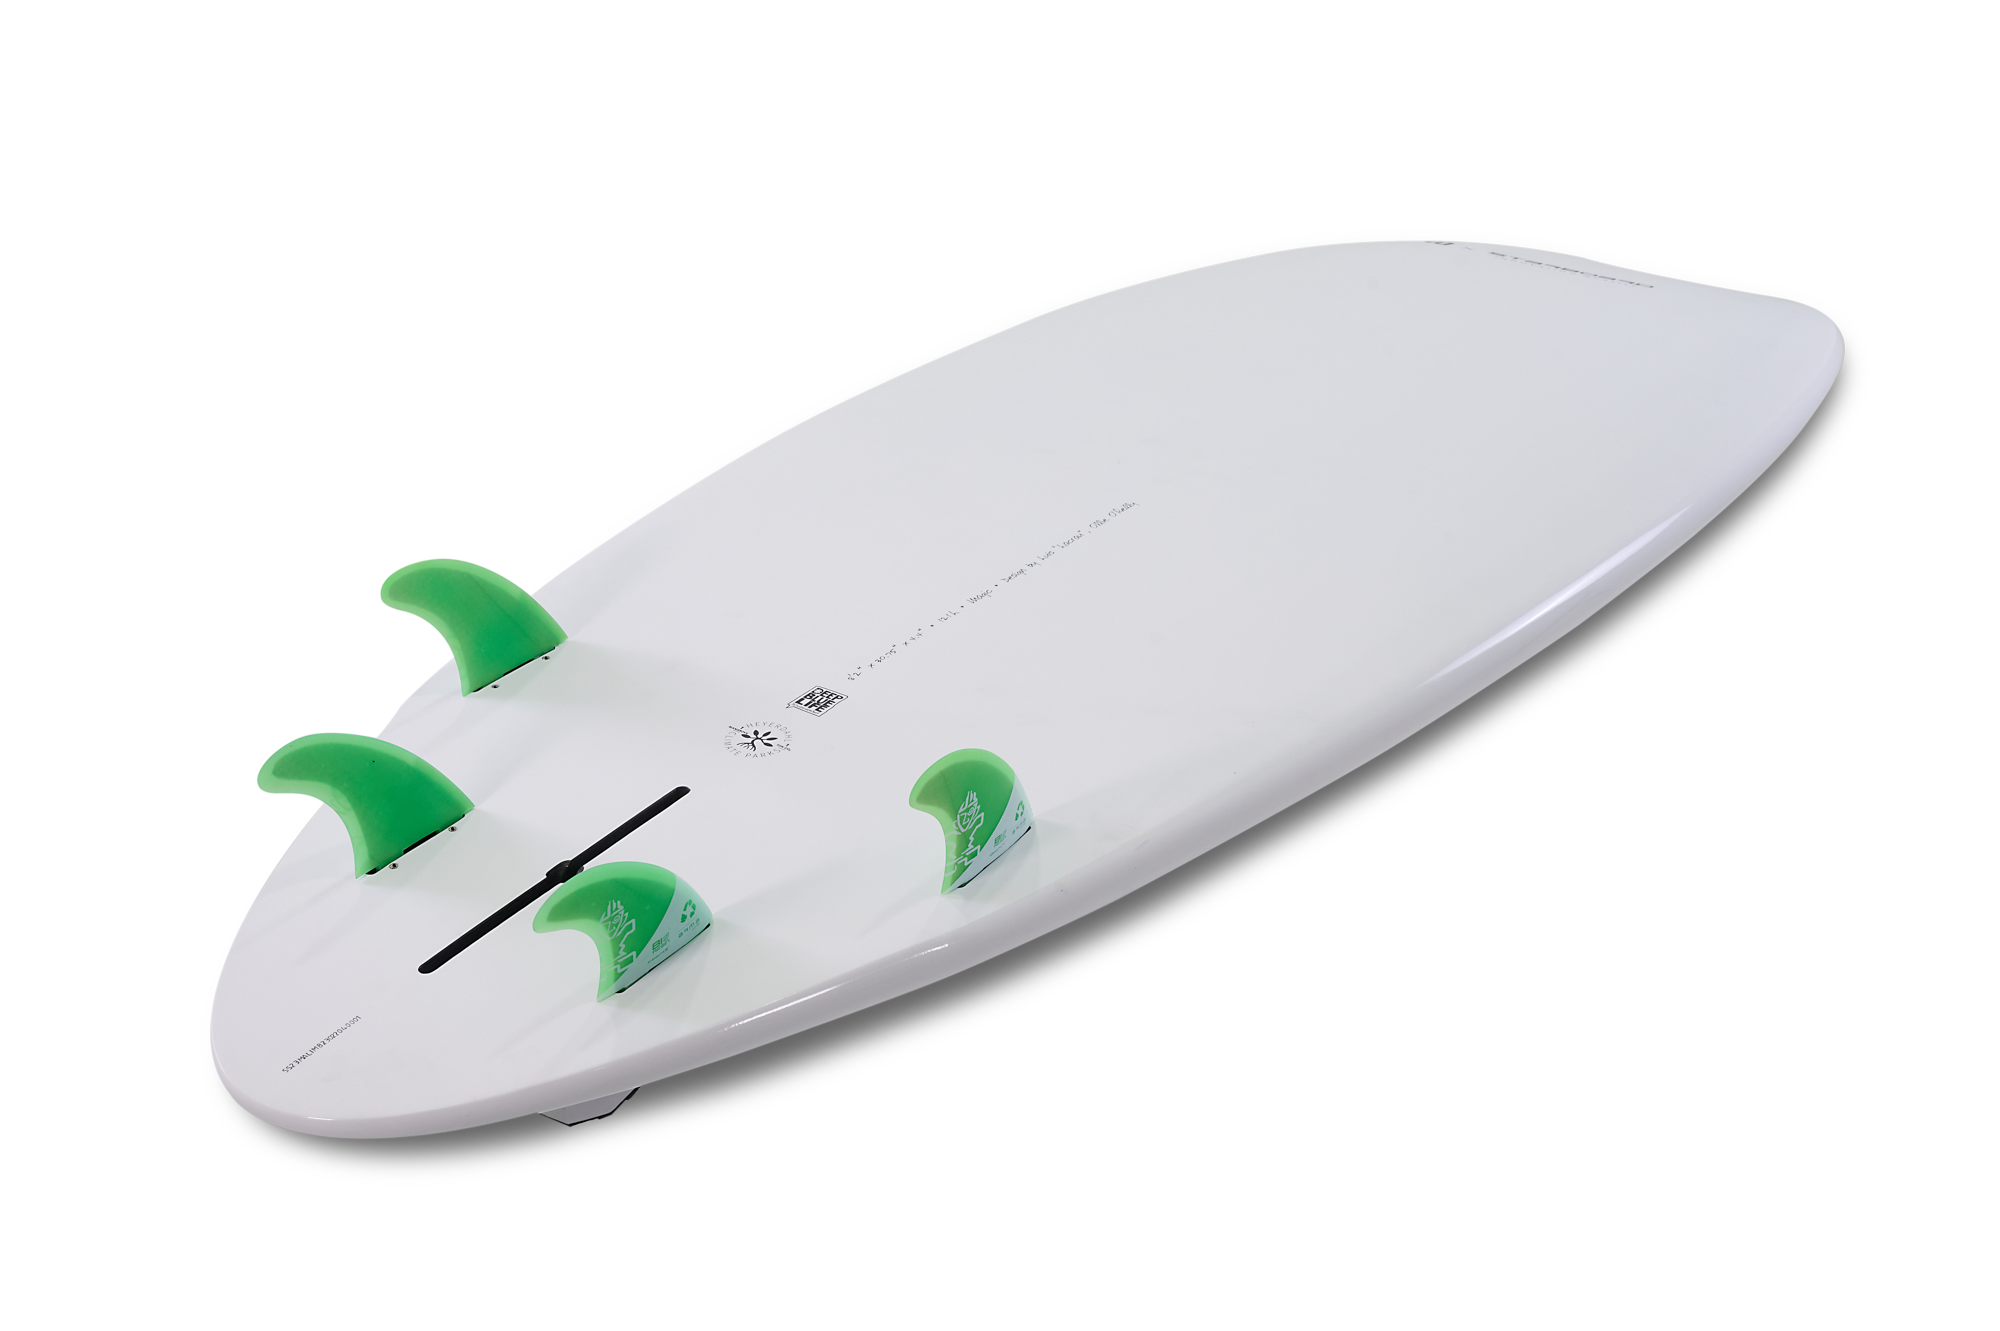 STARBOARD - SPICE LIMITED SERIES 8'8"